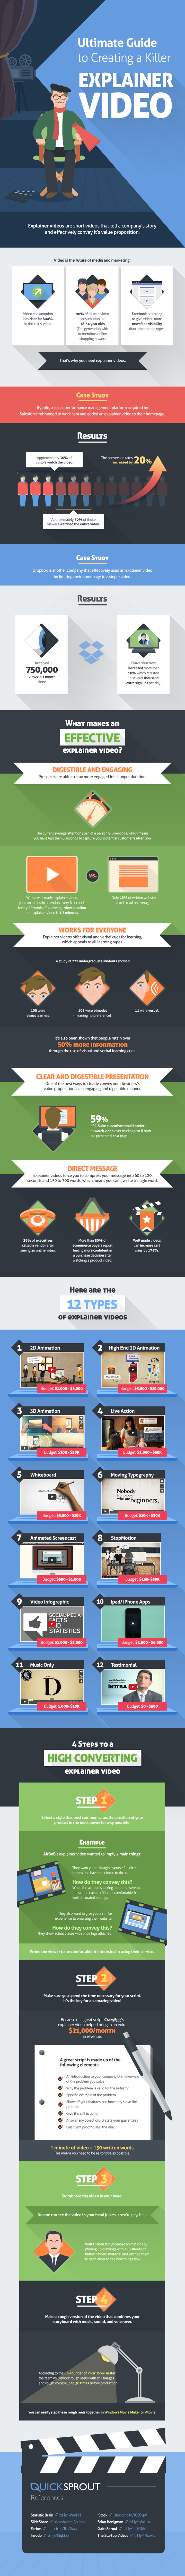 Create the Perfect Explainer Video